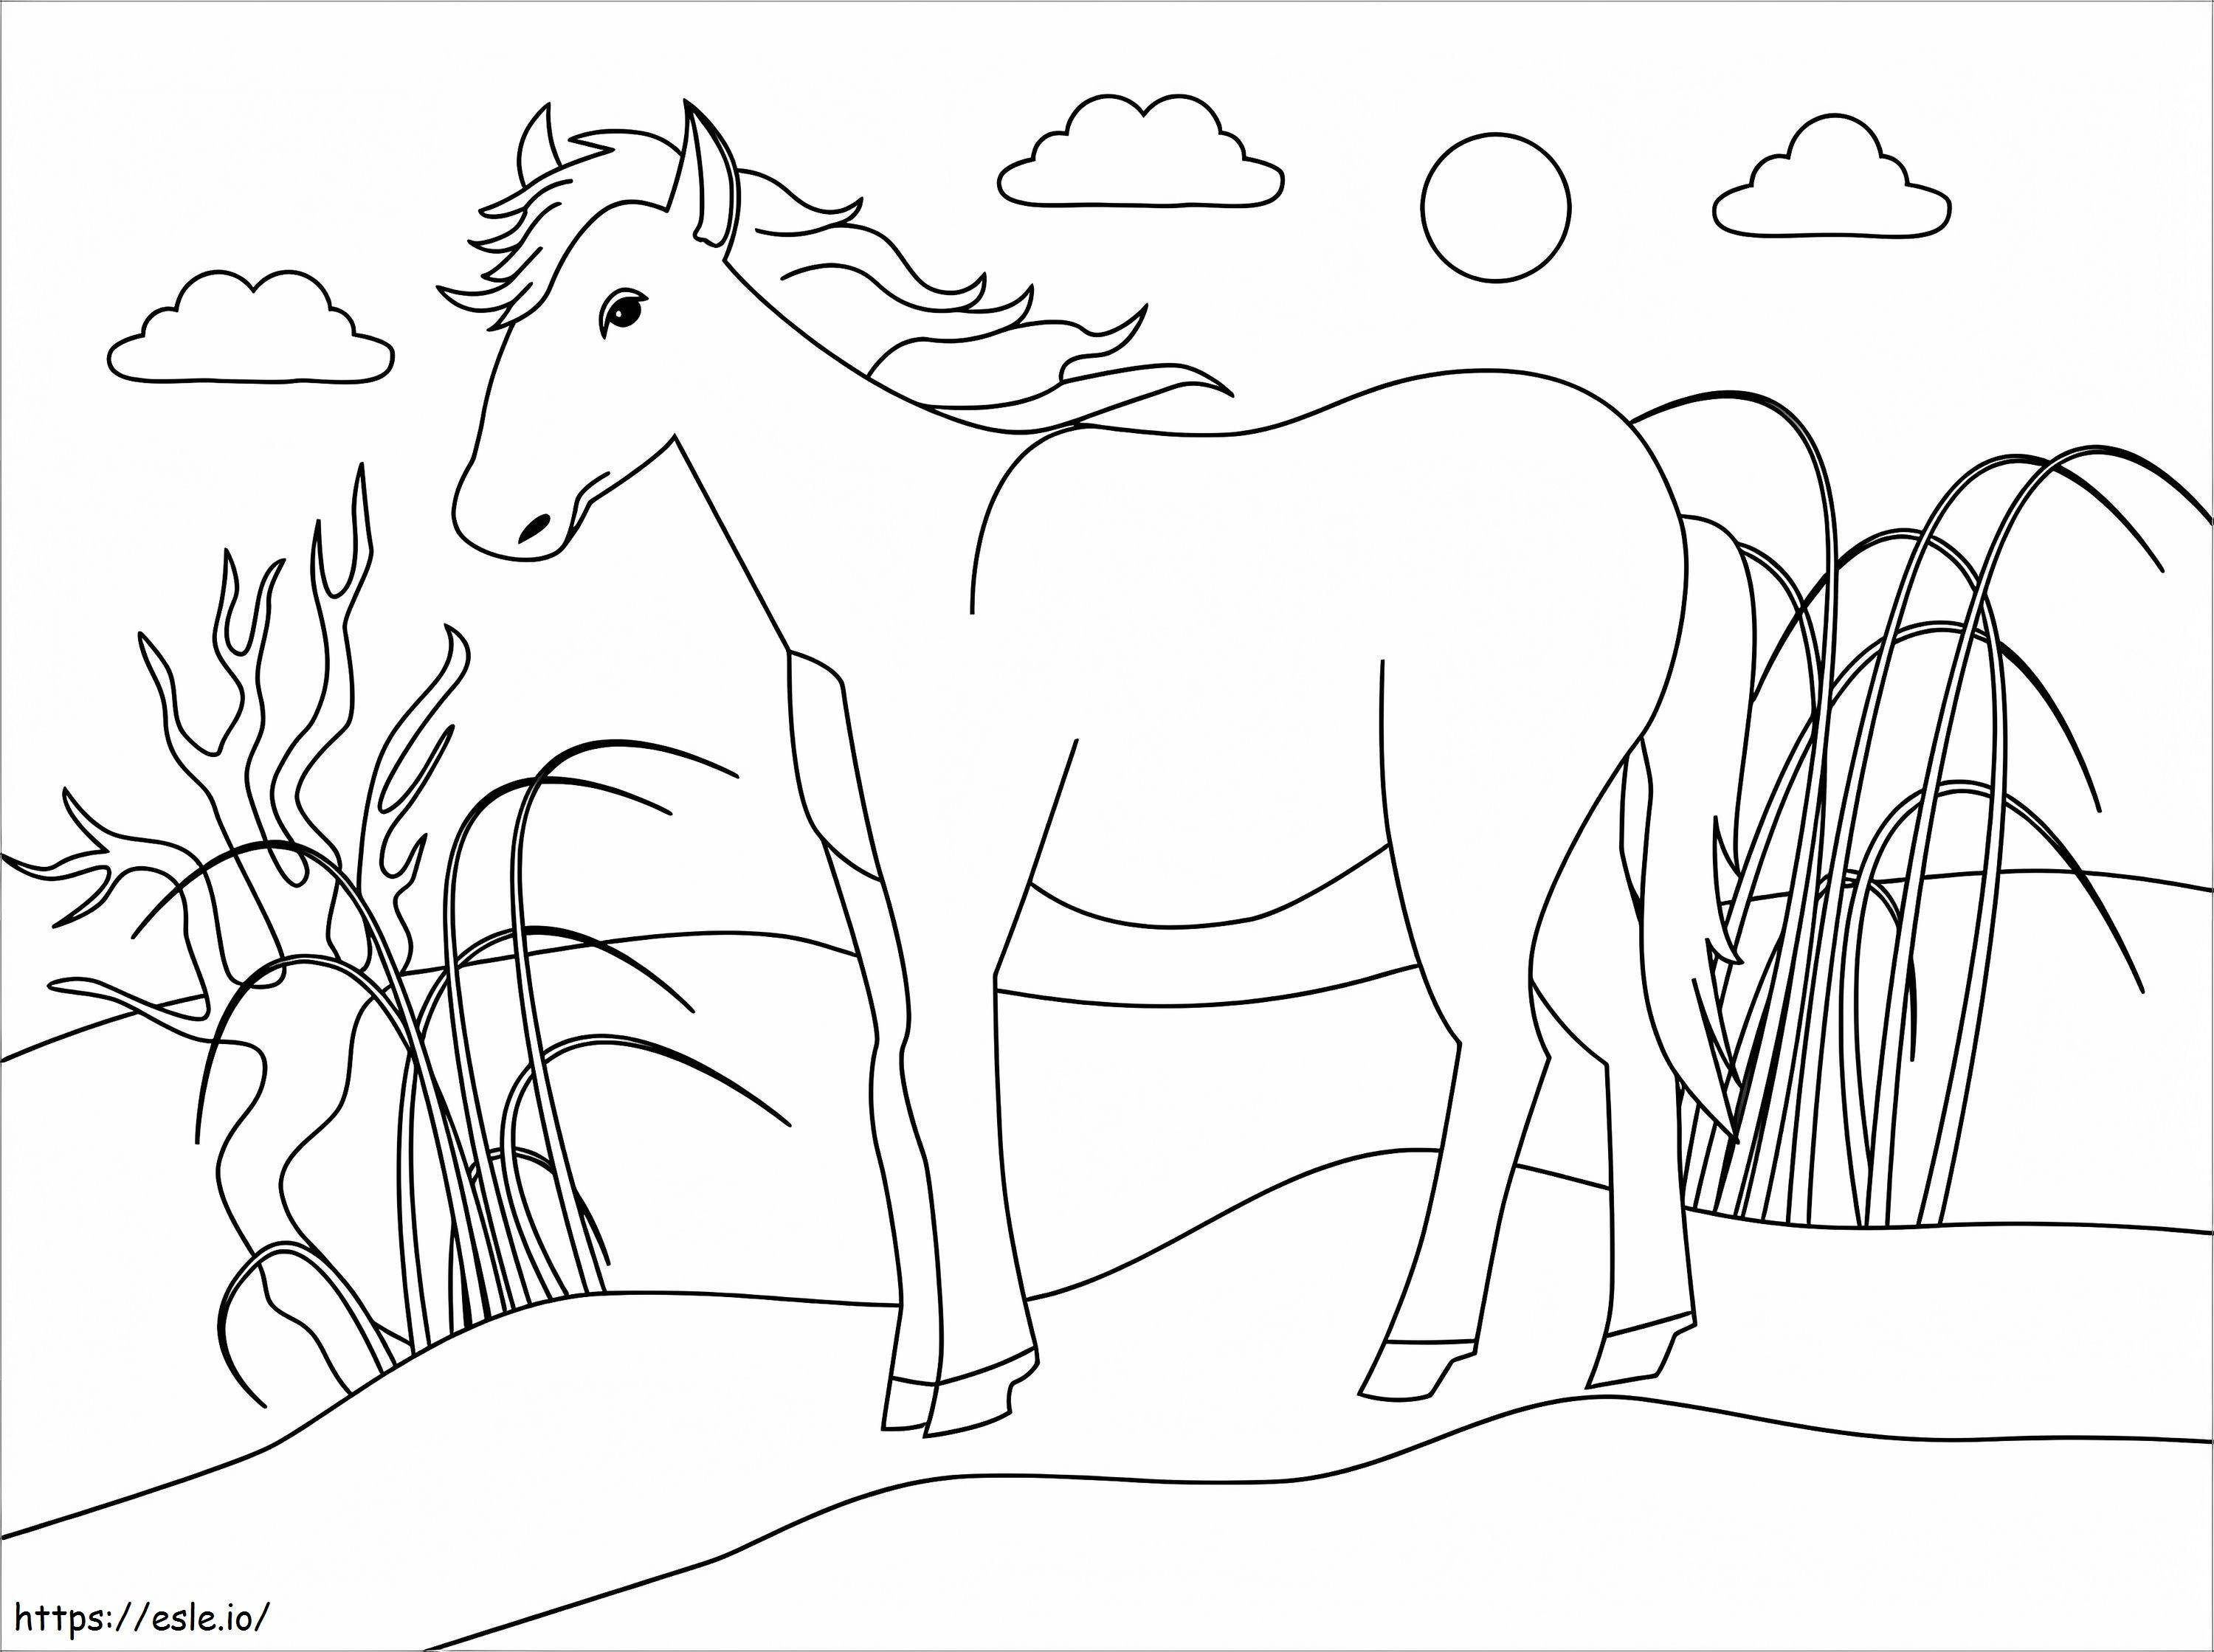 A Normal Horse coloring page